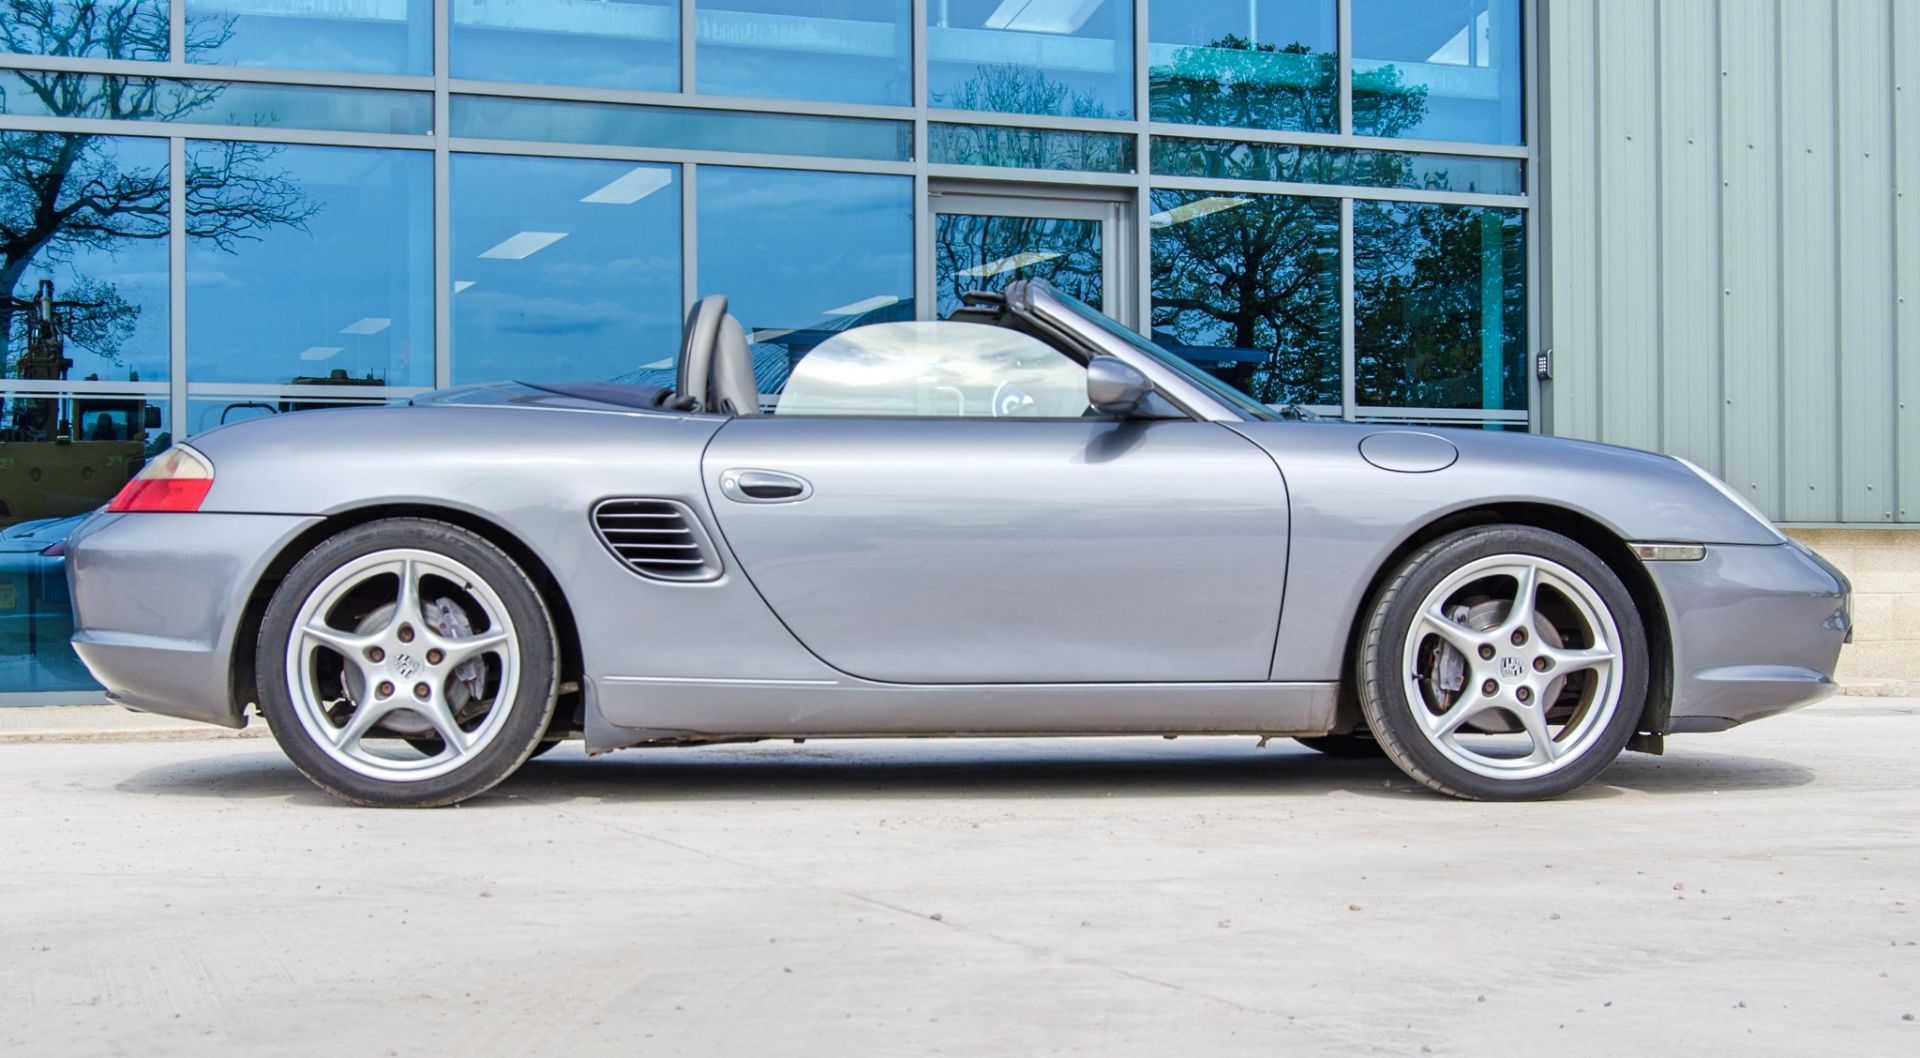 2003 Porsche Boxster 2.7 5 speed manual convertible roadster - Image 13 of 50